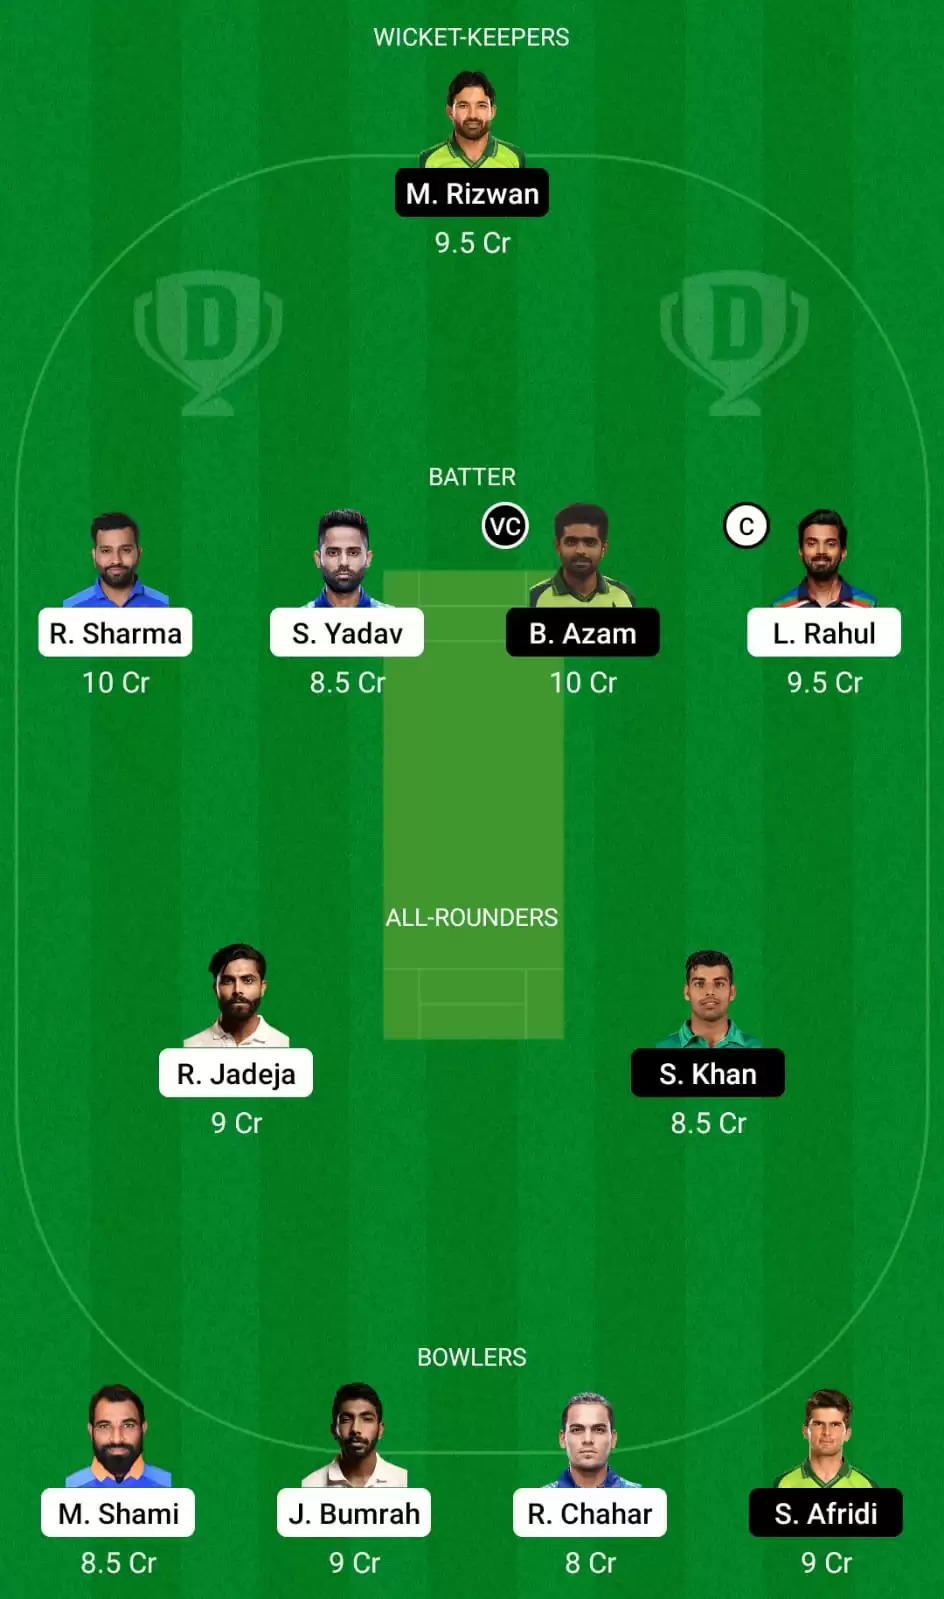 IND vs PAK Dream11 Prediction For ICC T20 World Cup 2021: Playing XI, Fantasy Cricket Tips, Team, Weather Updates and Pitch Report